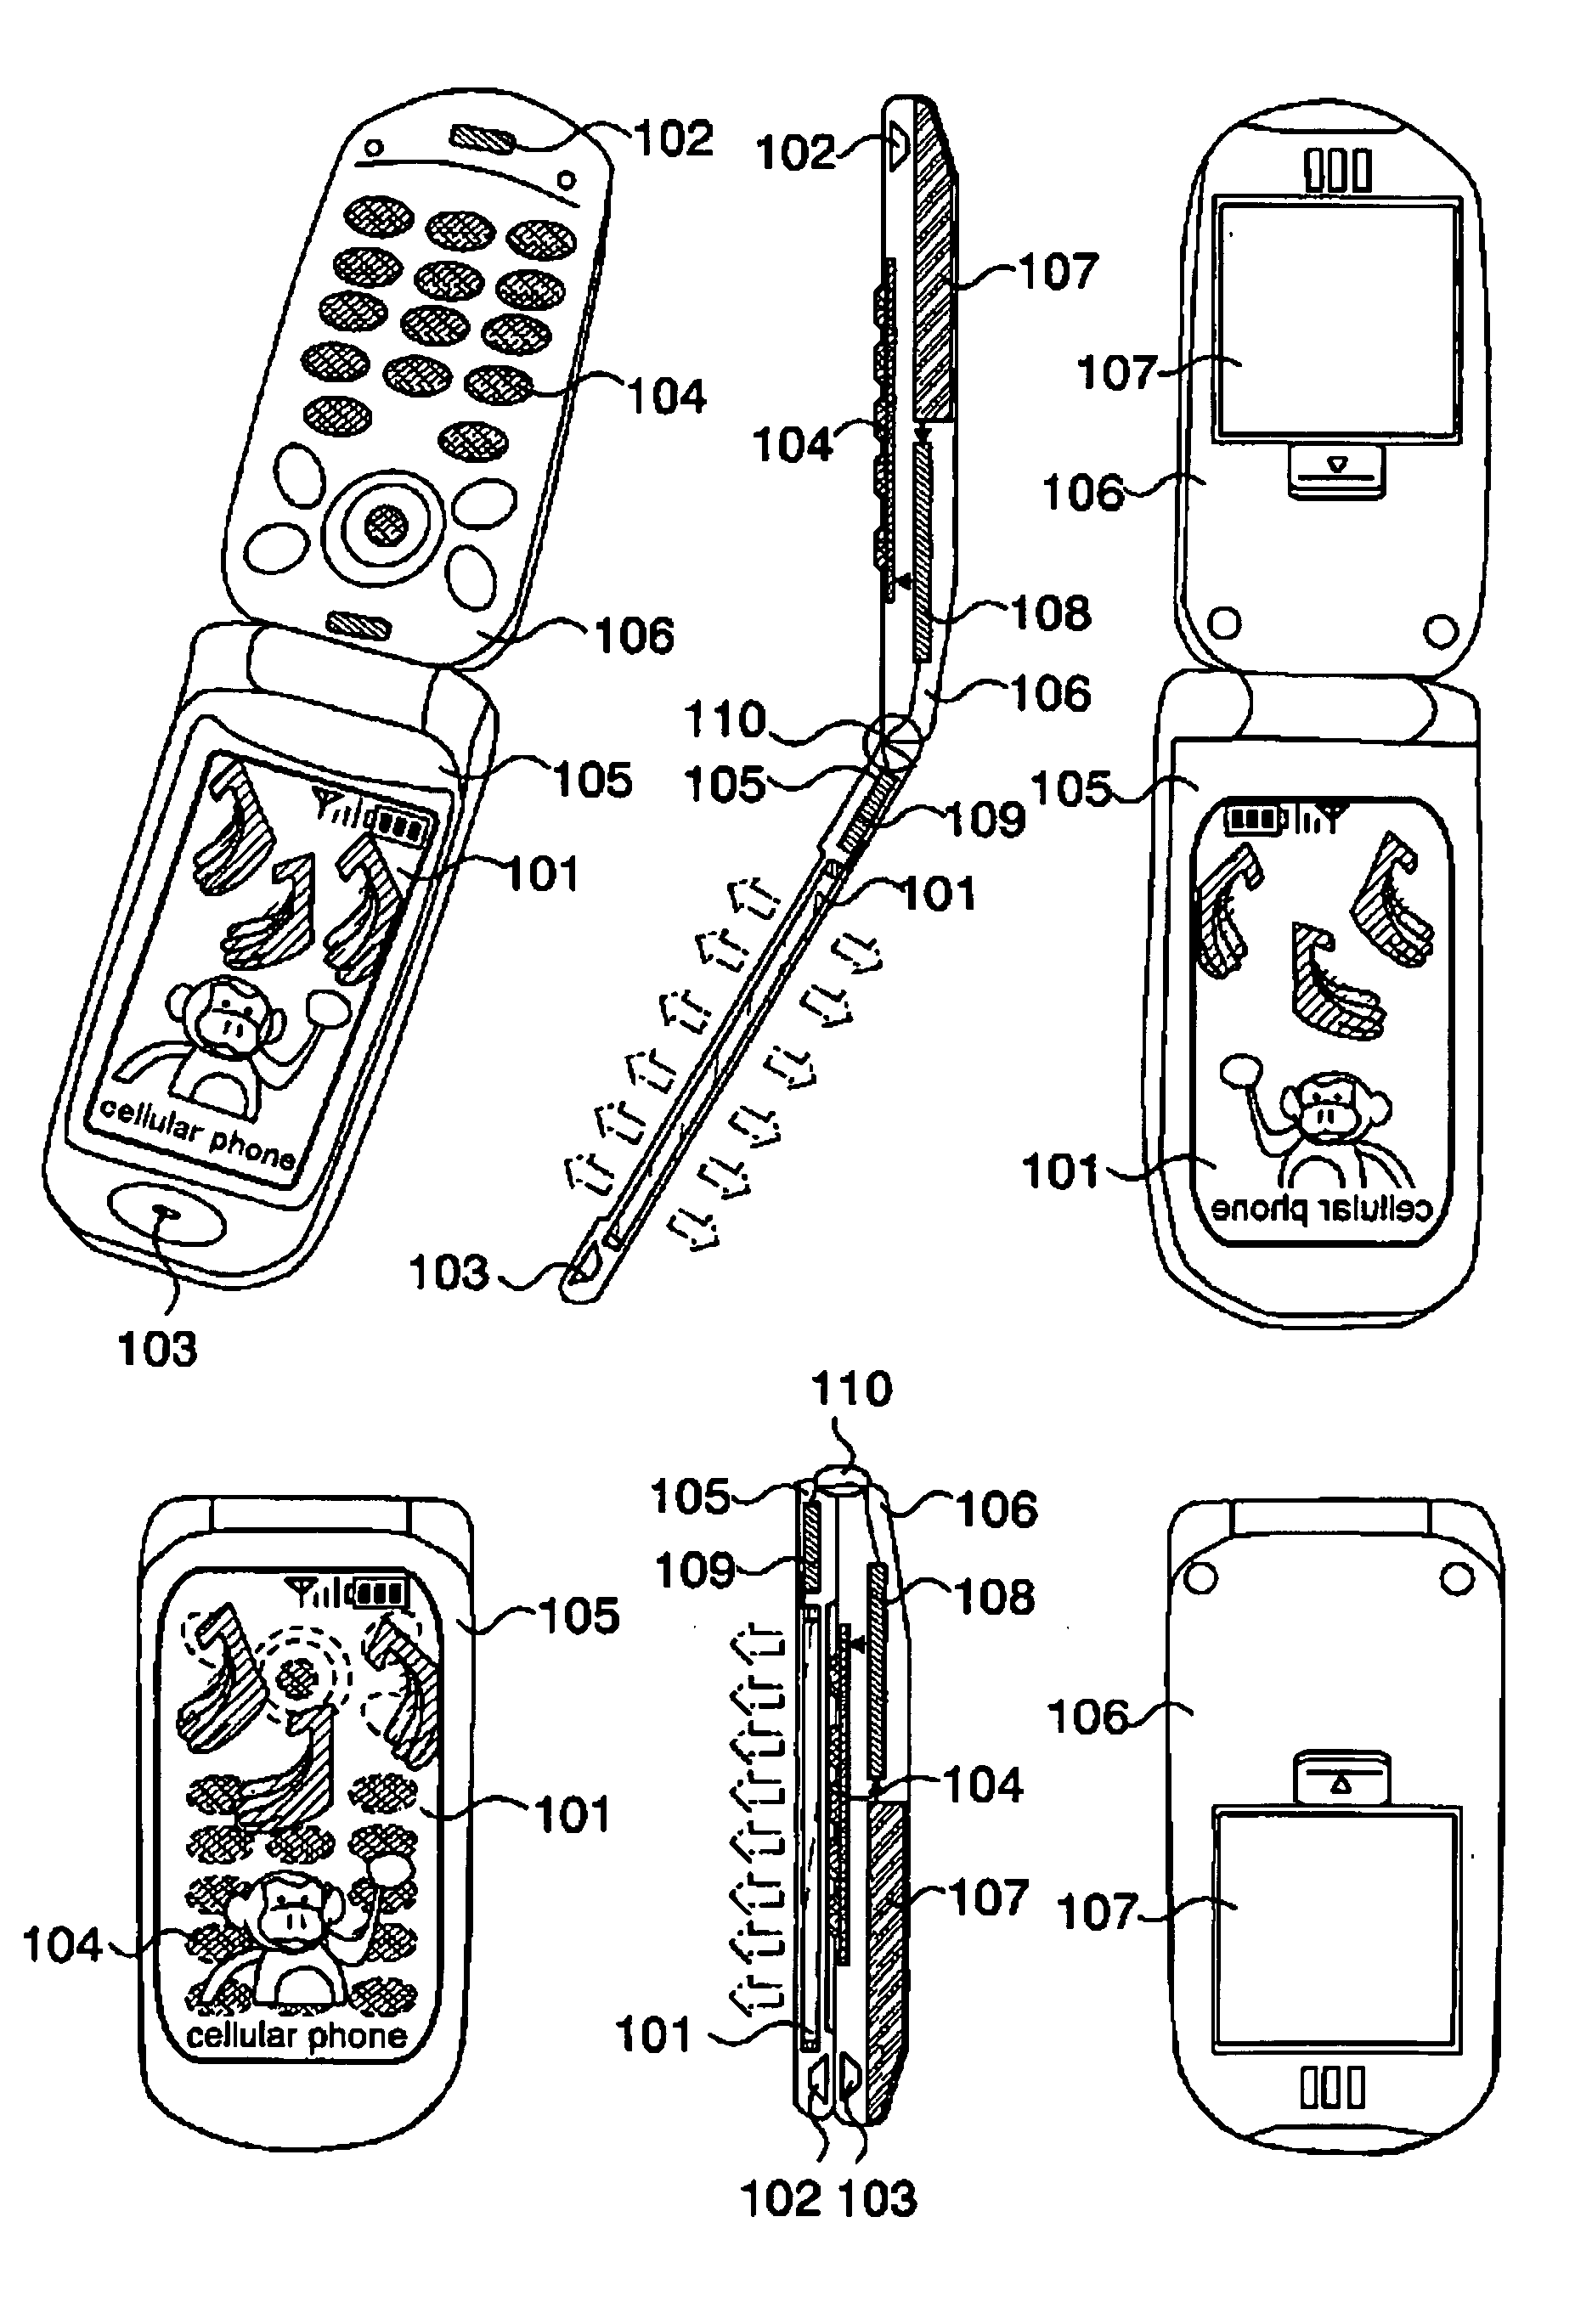 Display device and folding portable terminal